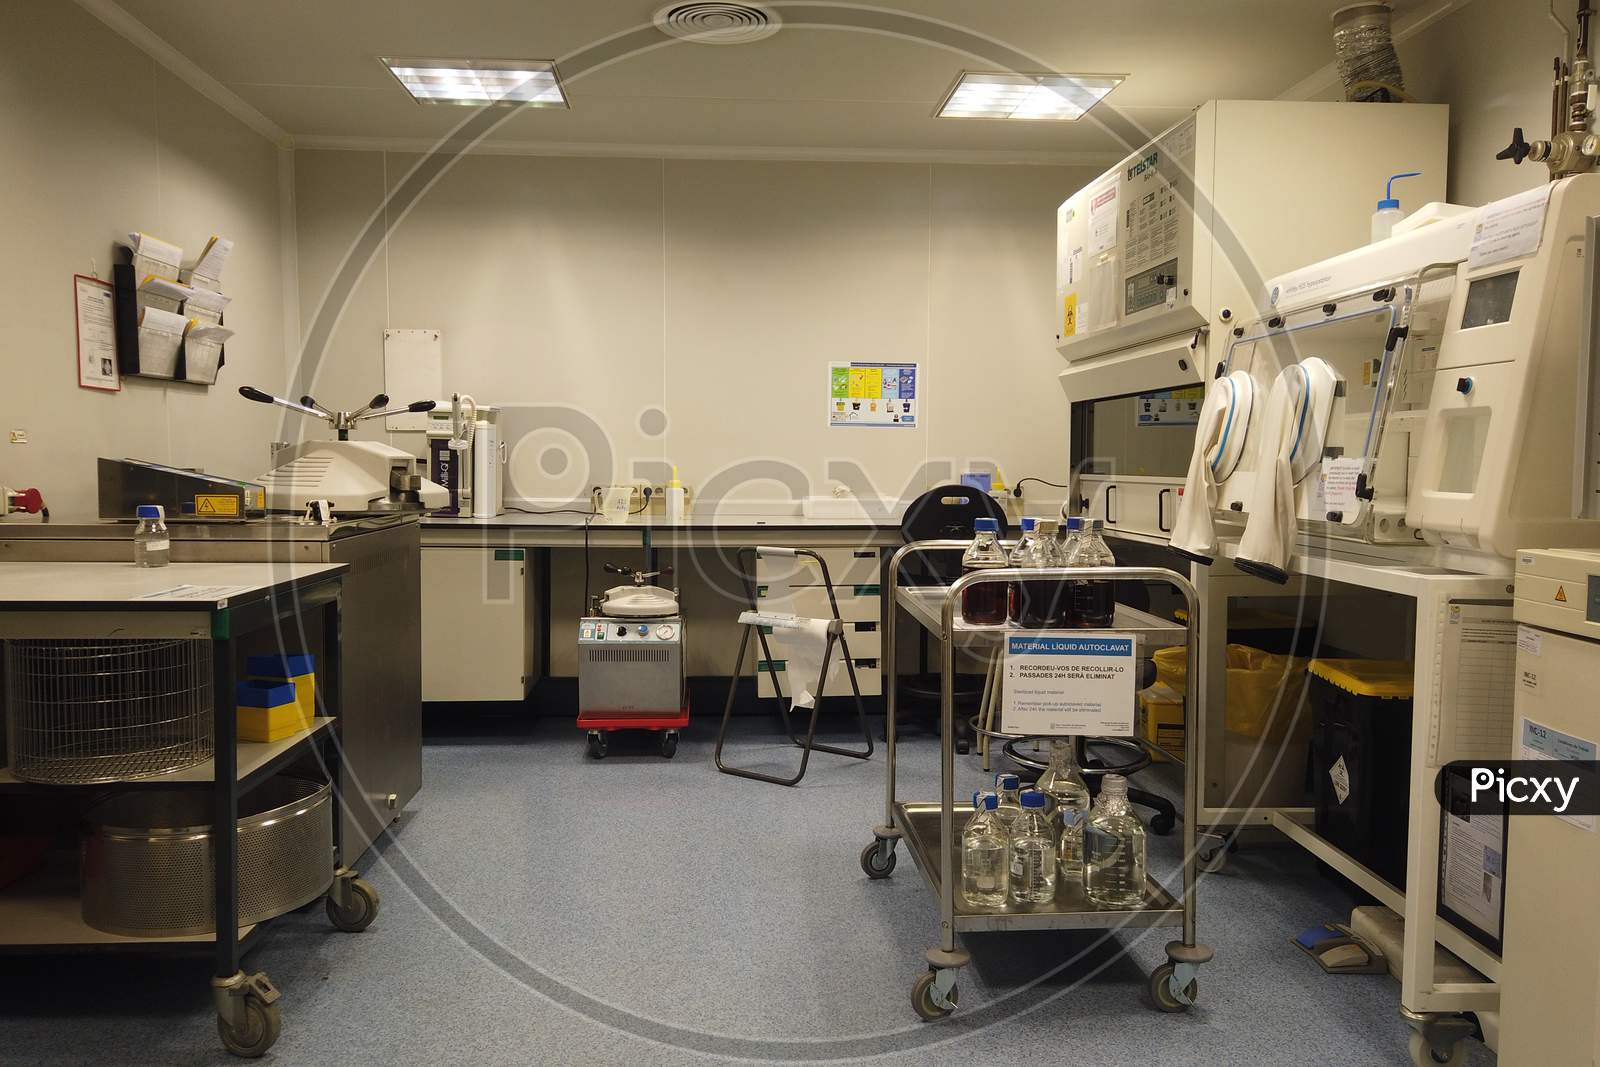 Interior of  a Science Research Lab during Covid-19 (Coronavirus) pandemic.